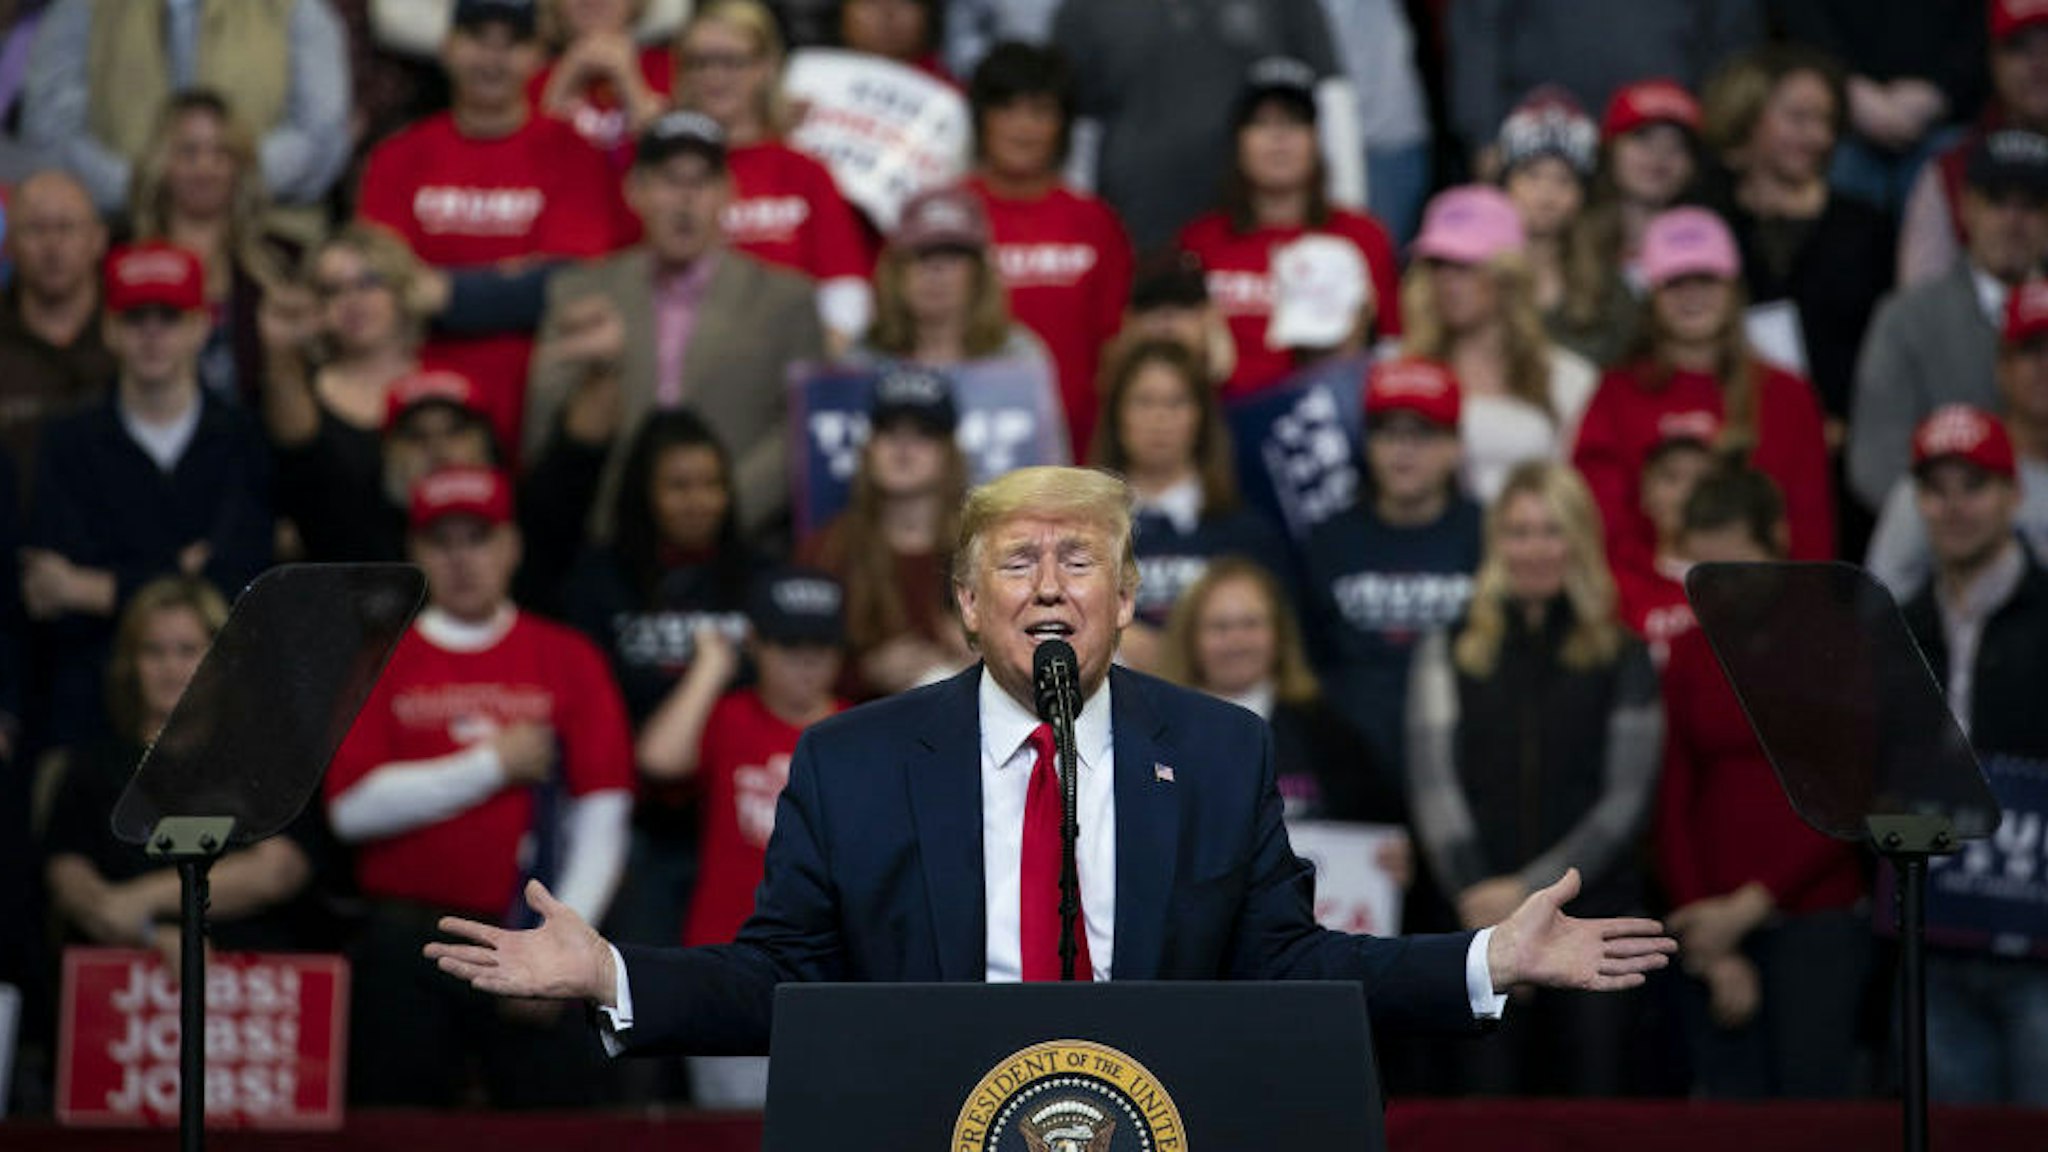 U.S. President Donald Trump speaks during a rally in Des Moines, Iowa, U.S., on Thursday, Jan. 30, 2020. Trump and Democratic presidential hopeful Michael Bloomberg on Thursday unveiled dueling multimillion-dollar campaign ads that are scheduled to air during the Super Bowl on Sunday. Photographer: Al Drago/Bloomberg